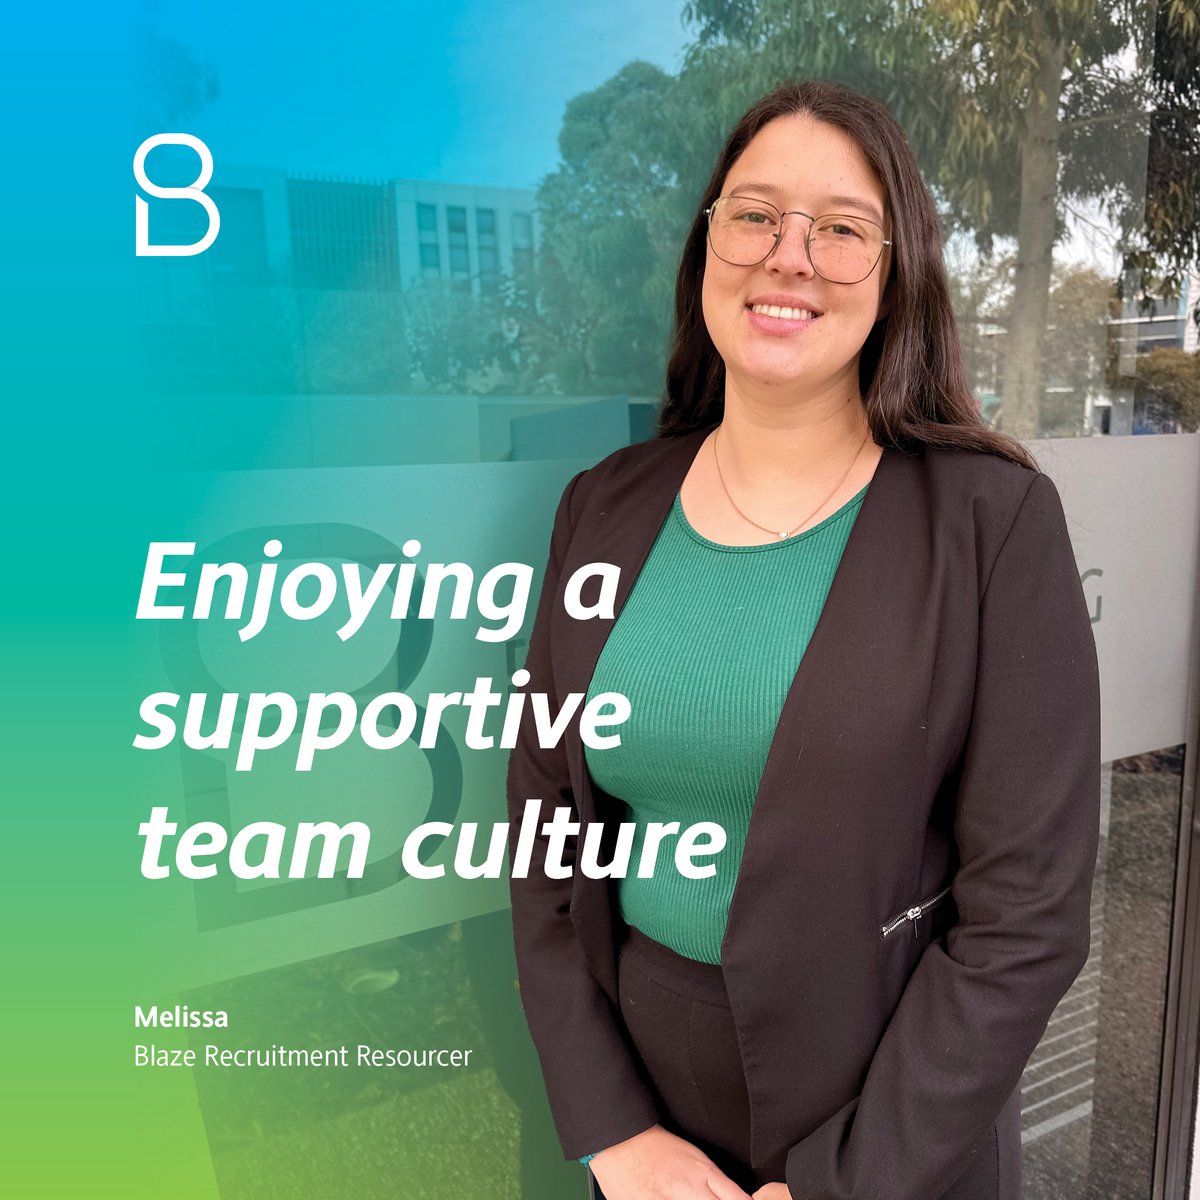 Welcome to the team, our new recruitment resourcer, Melissa Brown! We’re excited to have you on board and to benefit from your experience in management of young teams. 

#ResourceSupport #Management #LabourWorkforce #BlazeStaffing